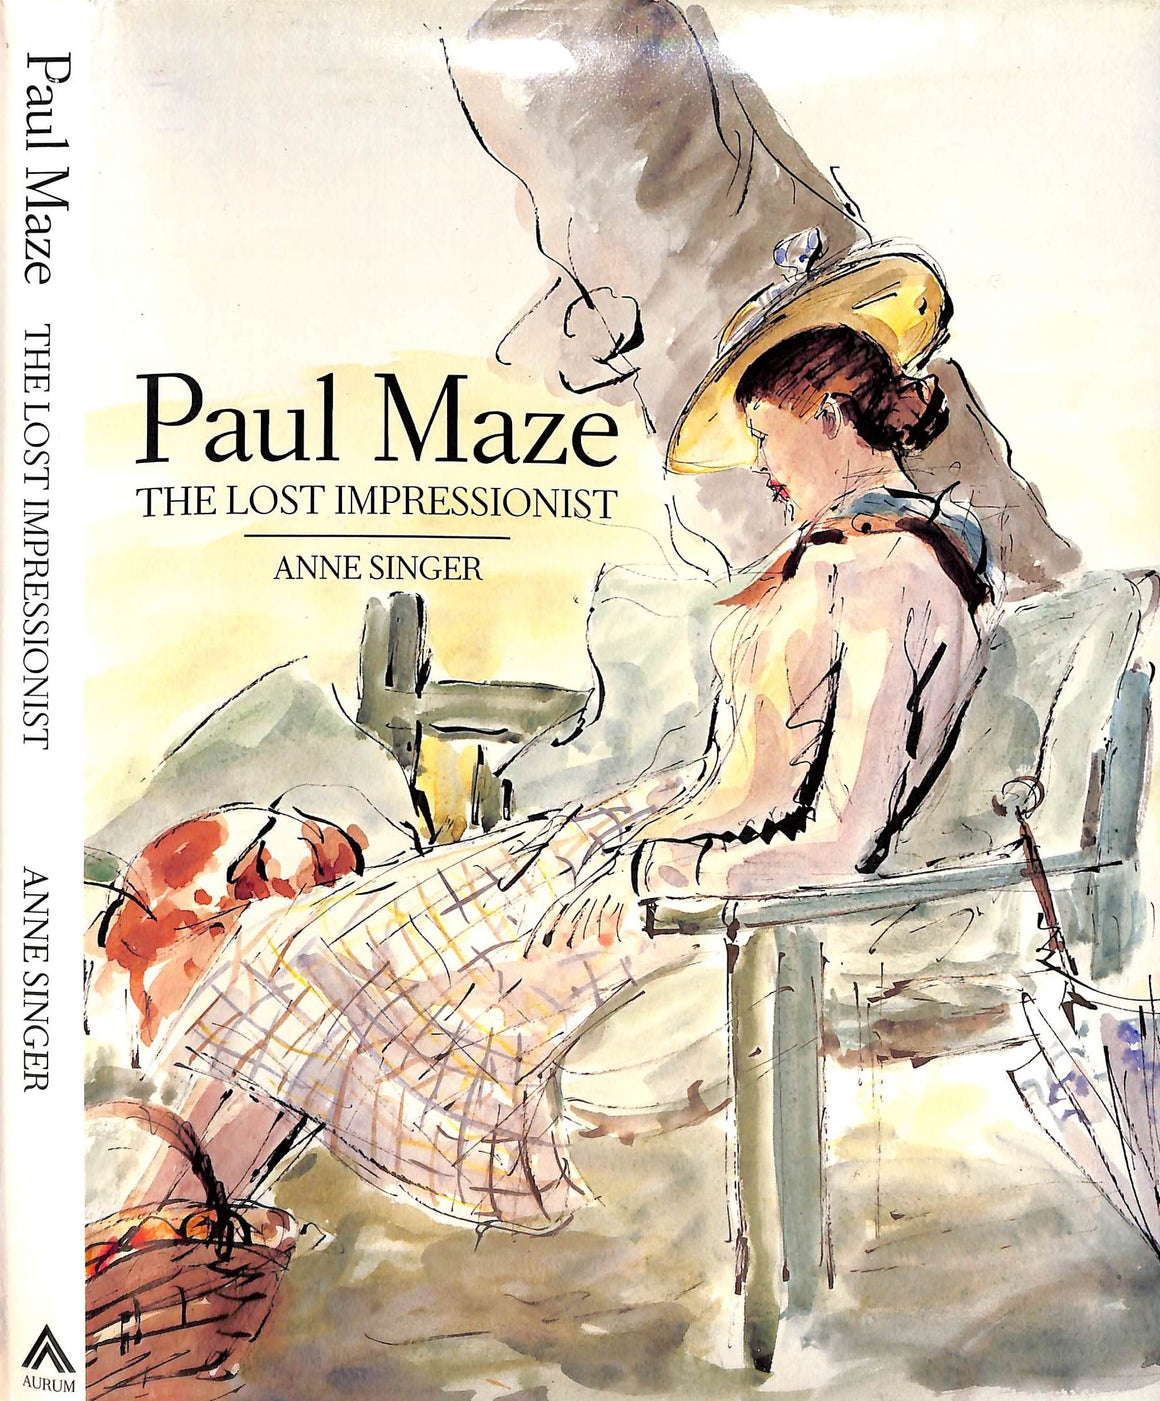 "Paul Maze The Lost Impressionist" 1983 SINGER, Anne (SOLD)